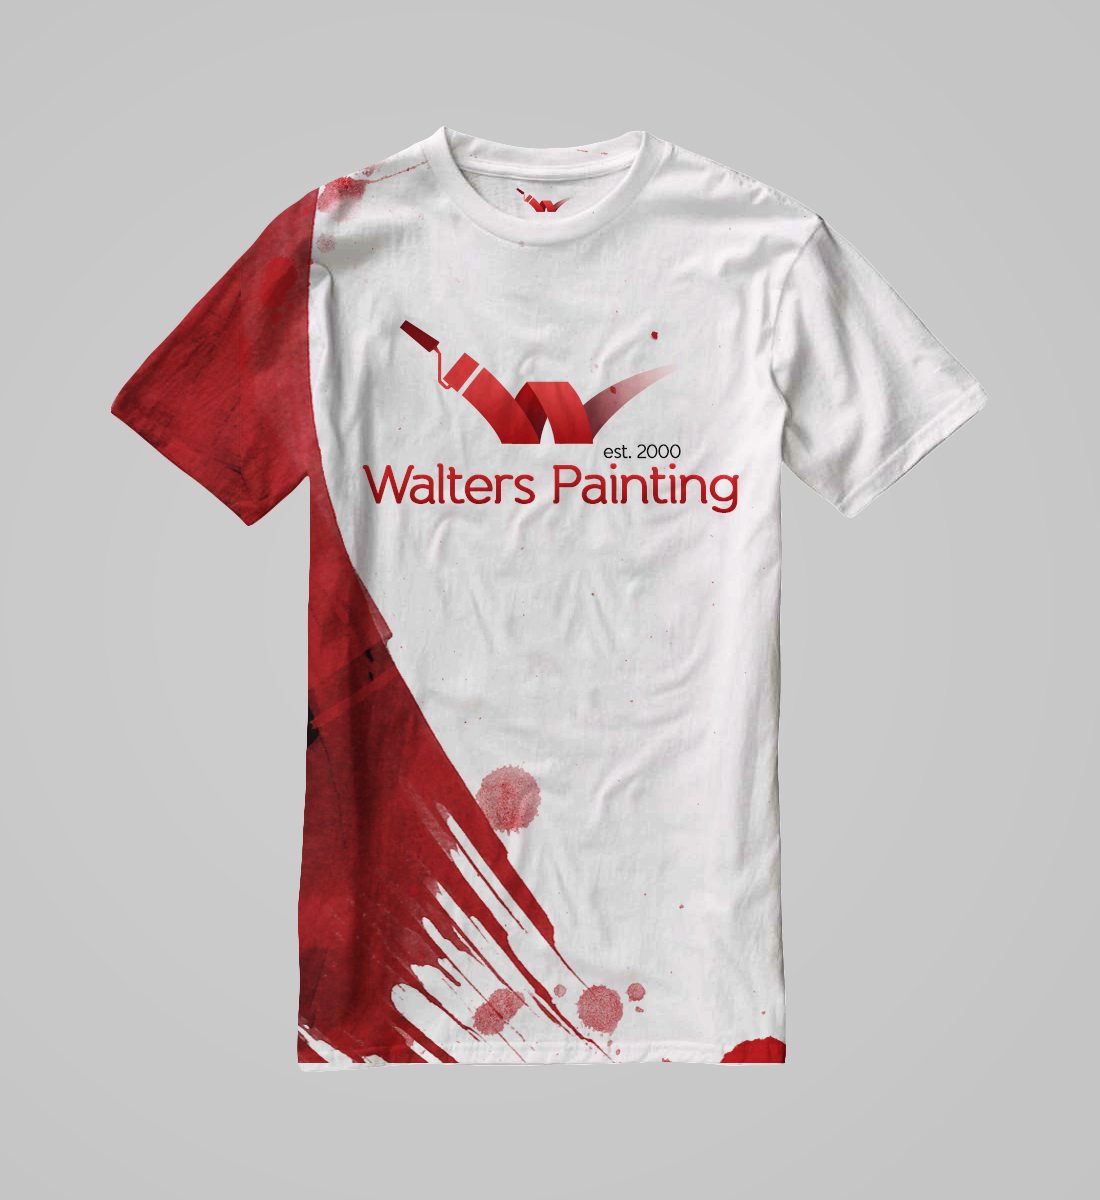 Walters Painting Branded T Shirt Design